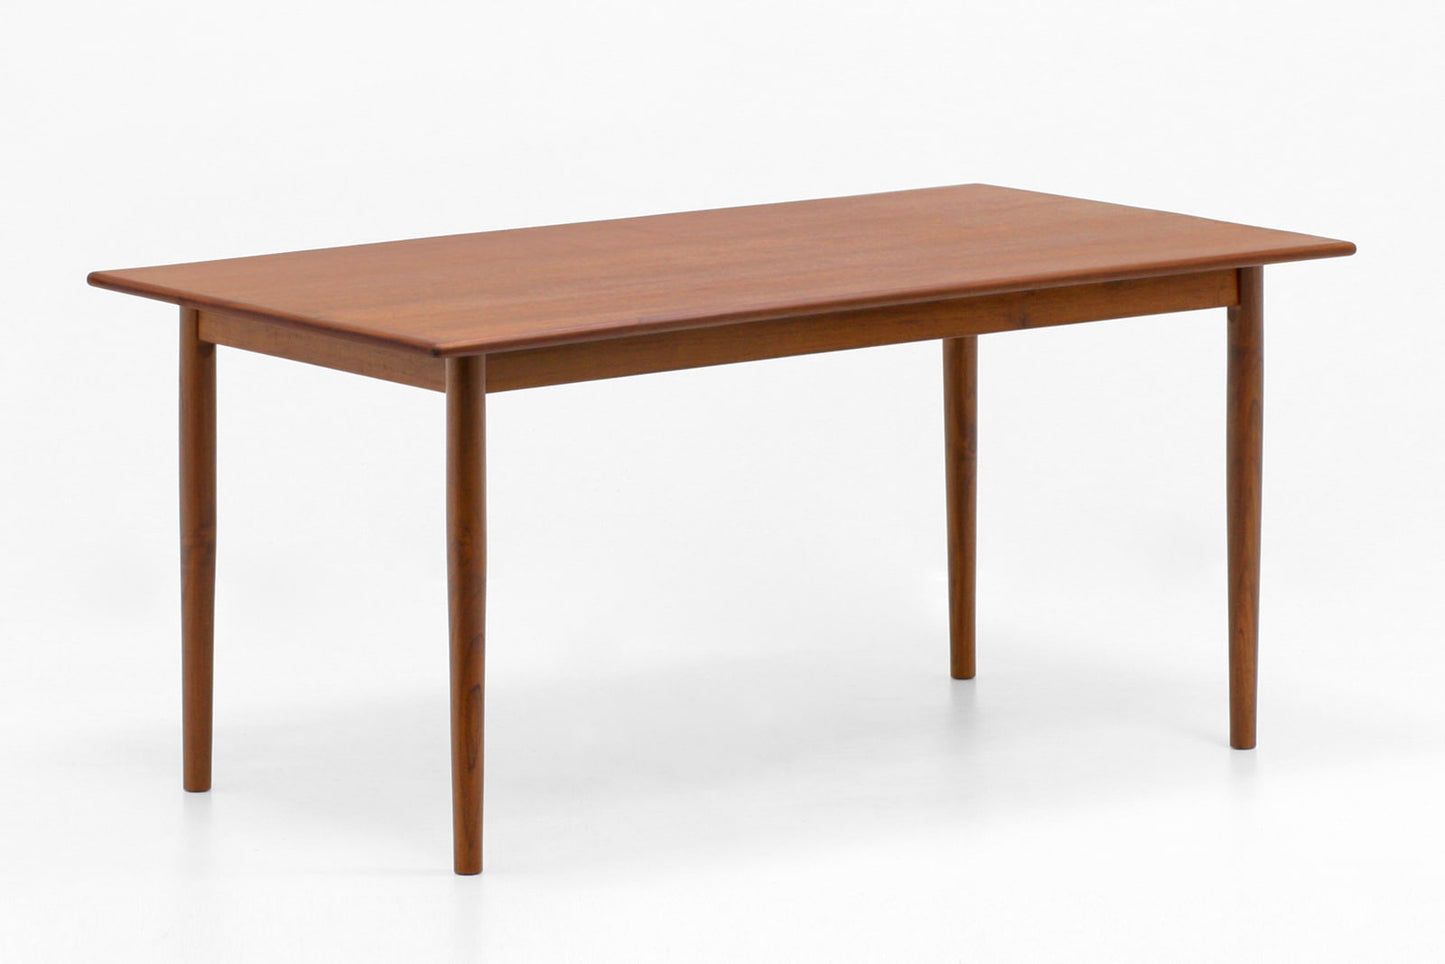 Trost dining table